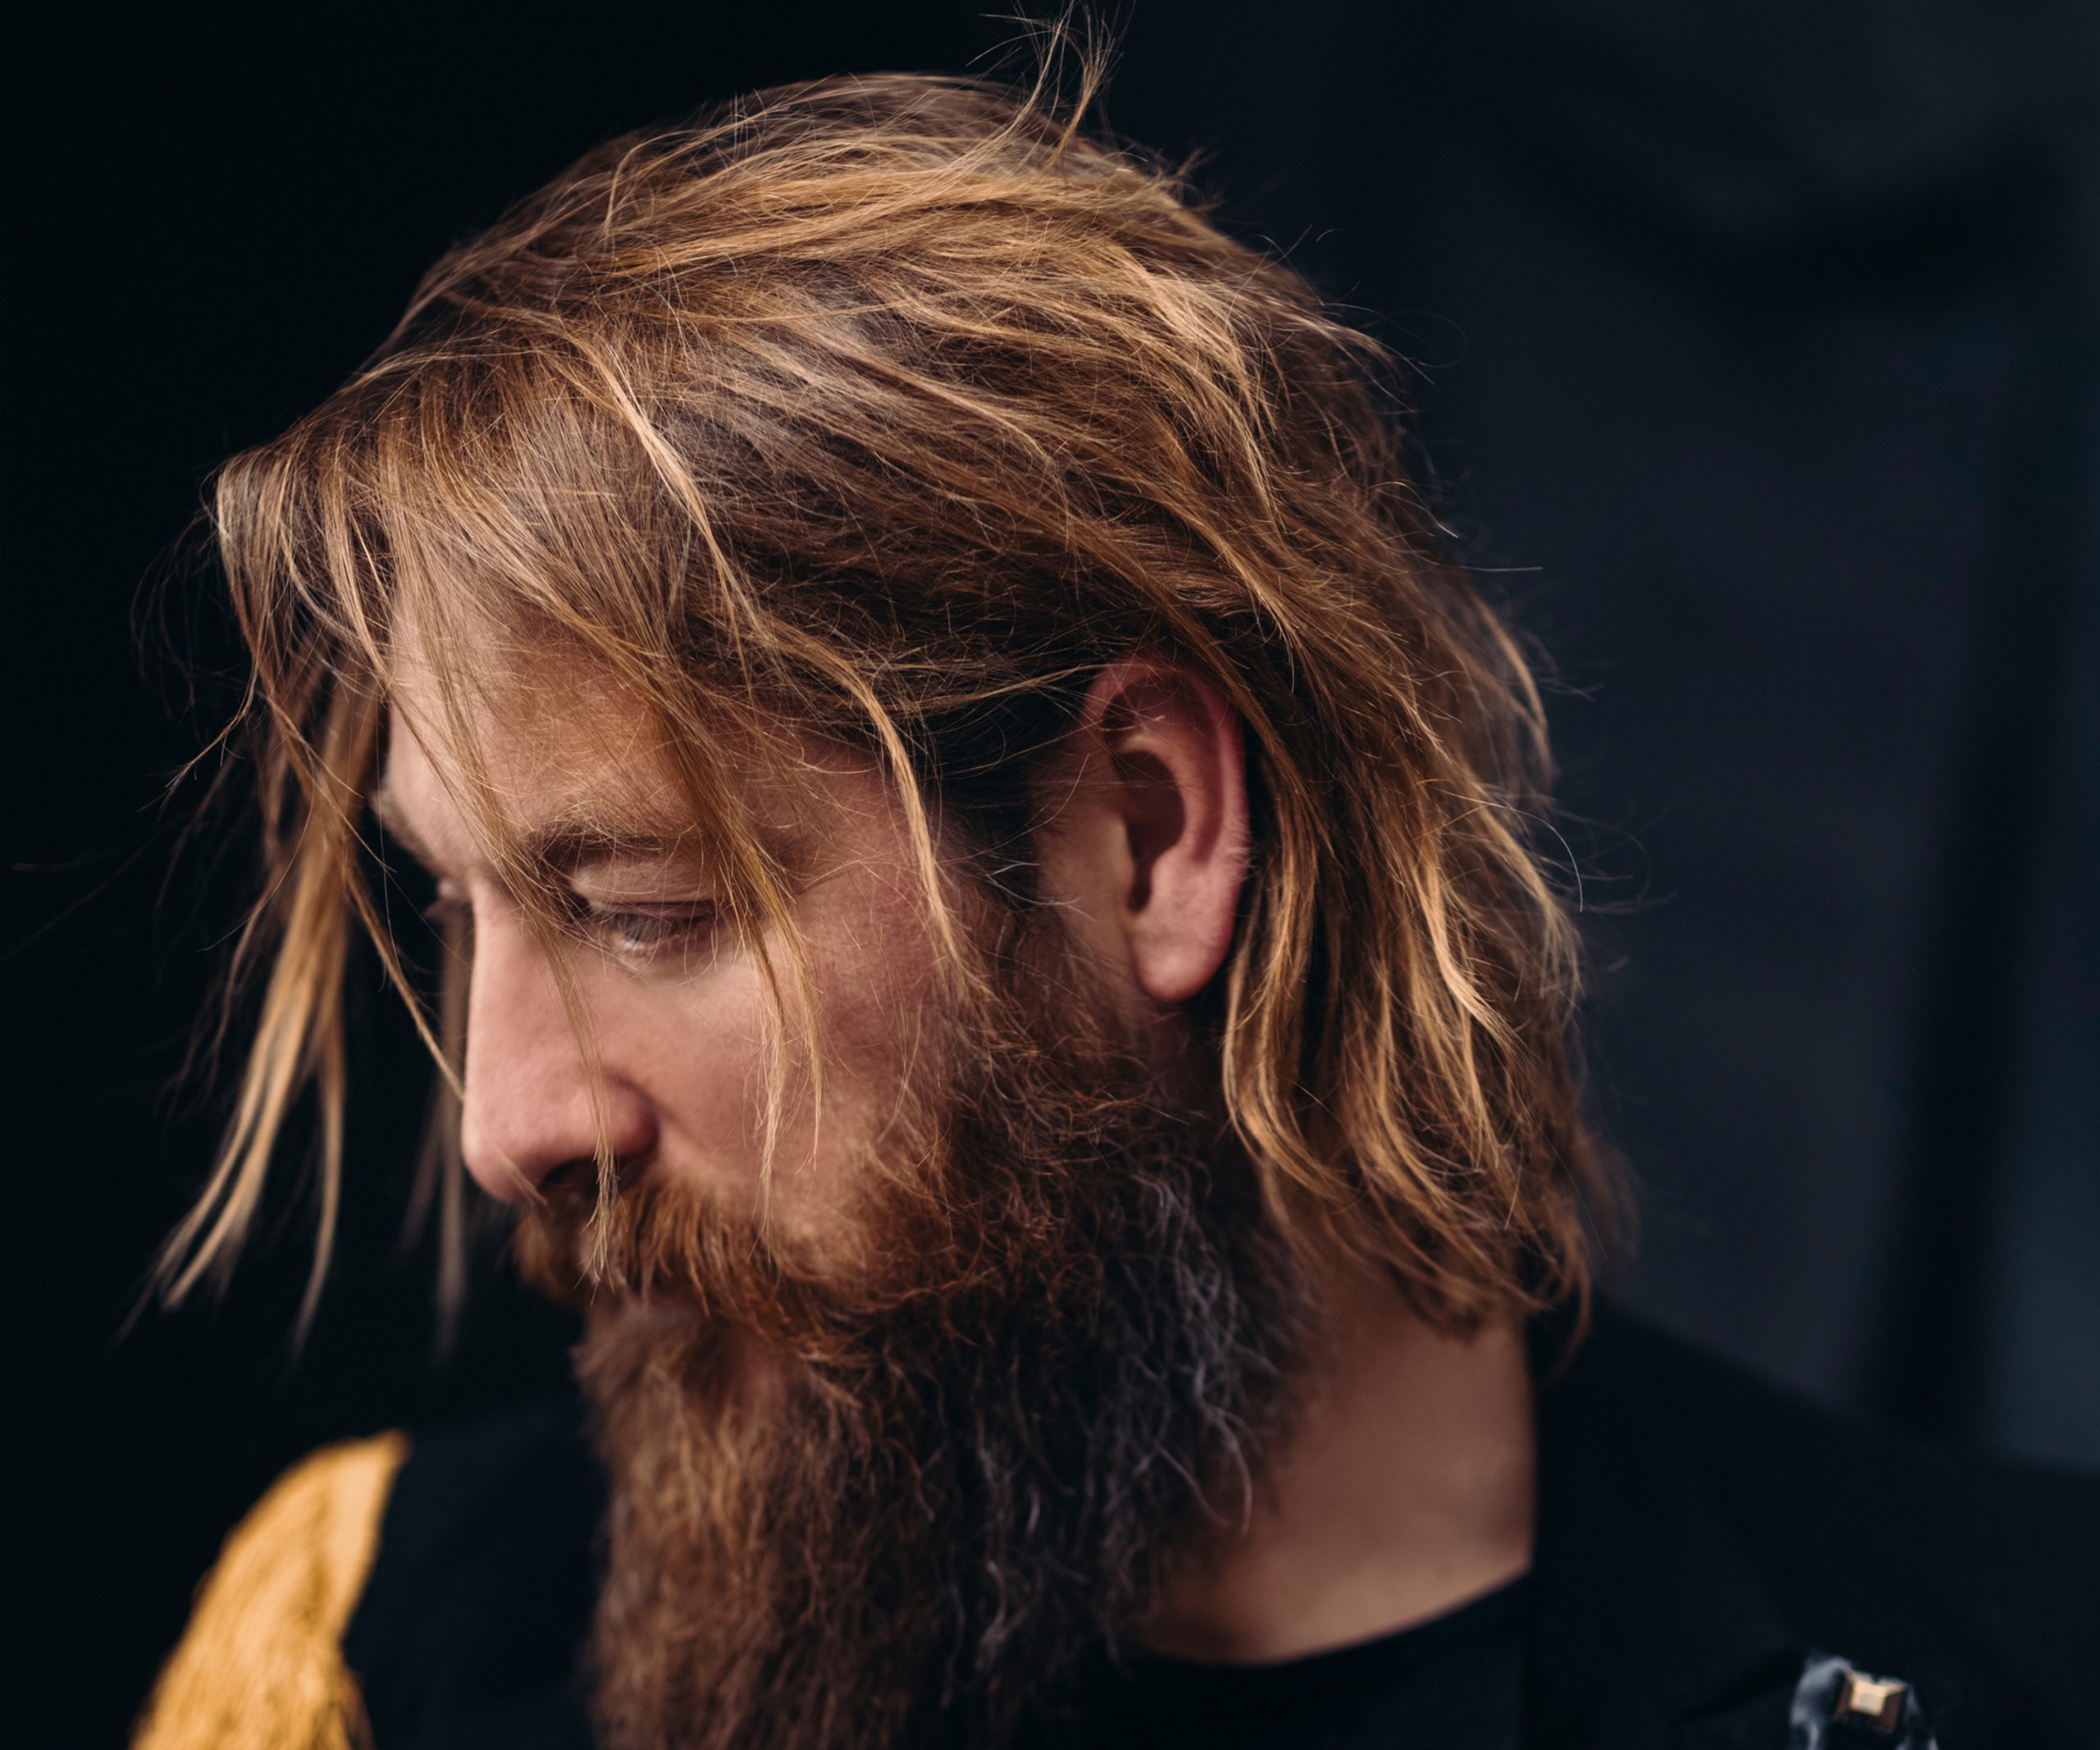 Joep Beving ‘Henosis’ - A Conclusion To The Album Trilogy - ZoneOut